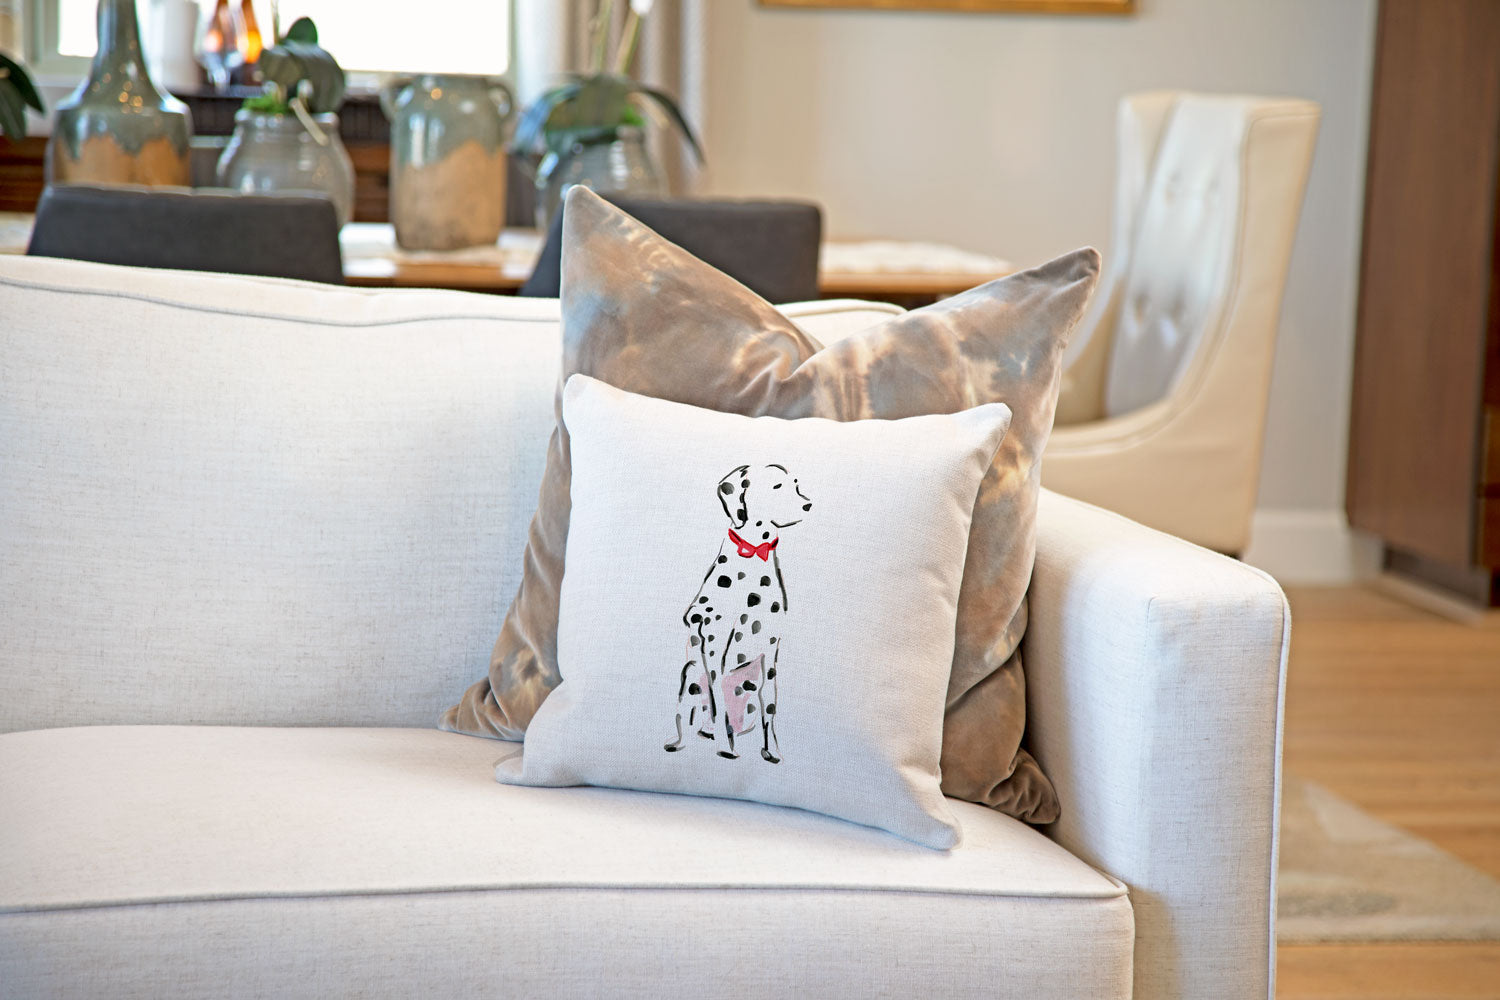 Dipper Dalmatian Throw Pillow Cover - Dog Illustration Throw Pillow Cover Collection-Di Lewis